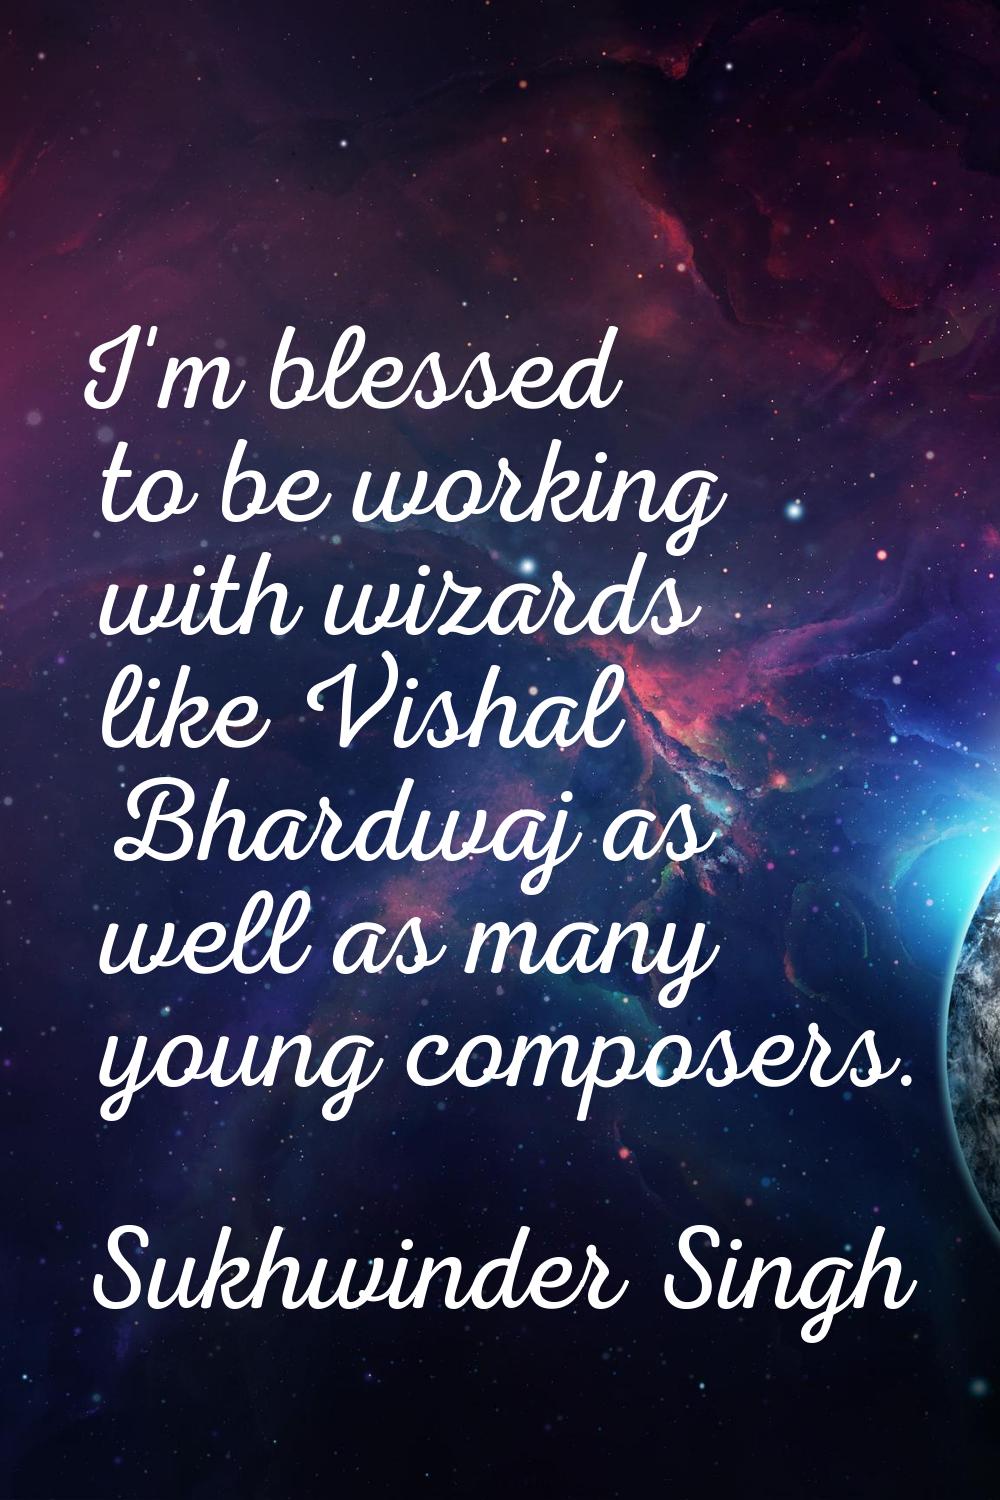 I'm blessed to be working with wizards like Vishal Bhardwaj as well as many young composers.